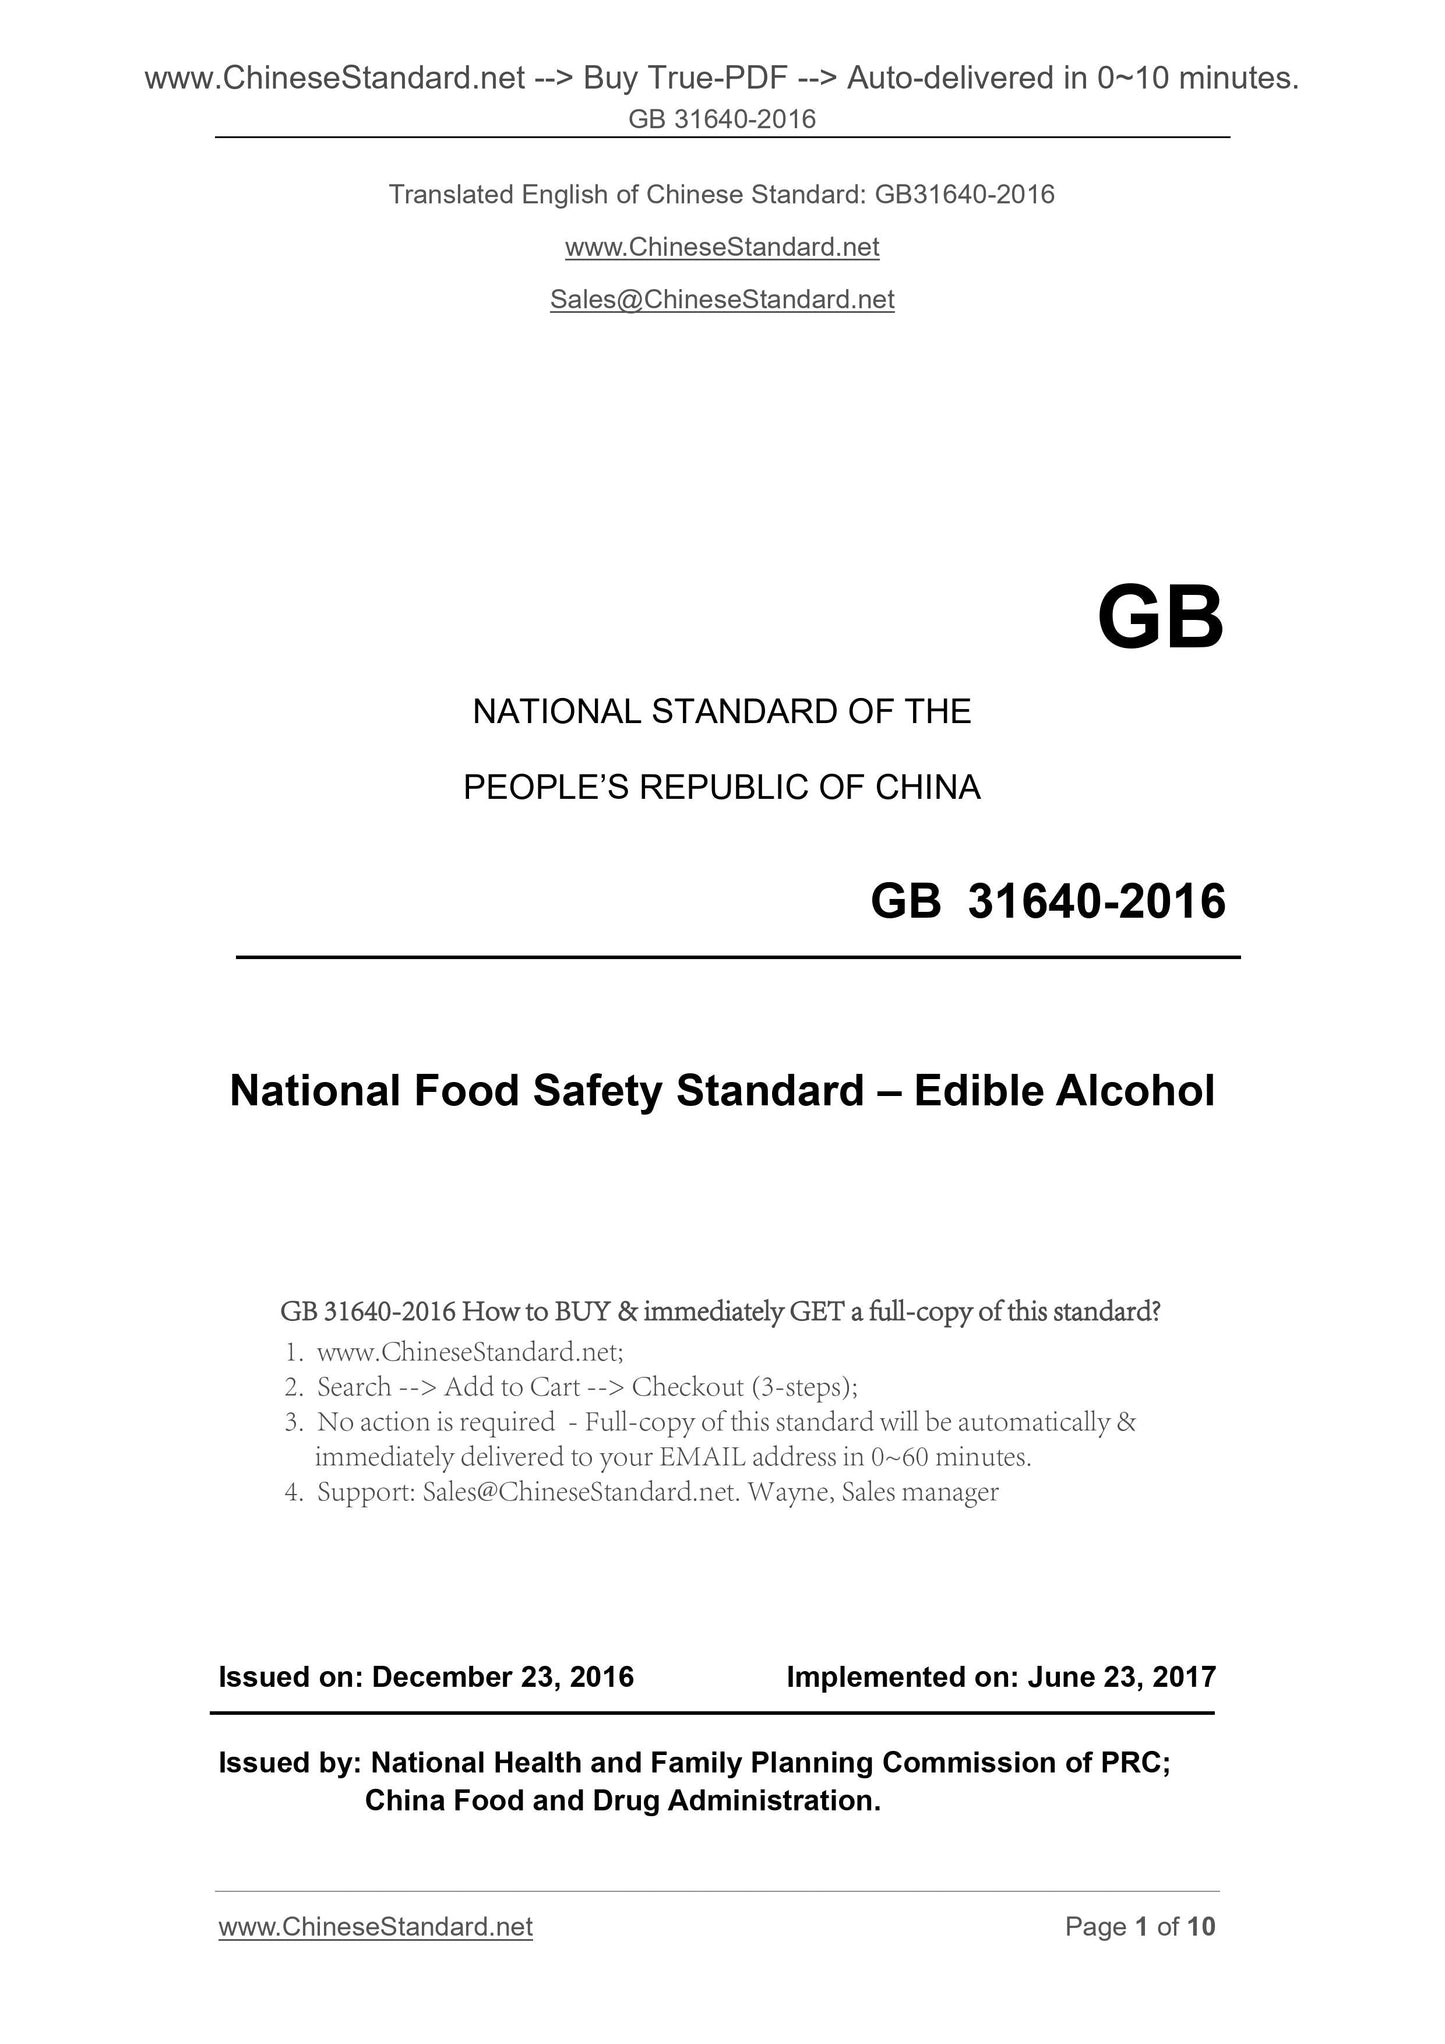 GB 31640-2016 Page 1